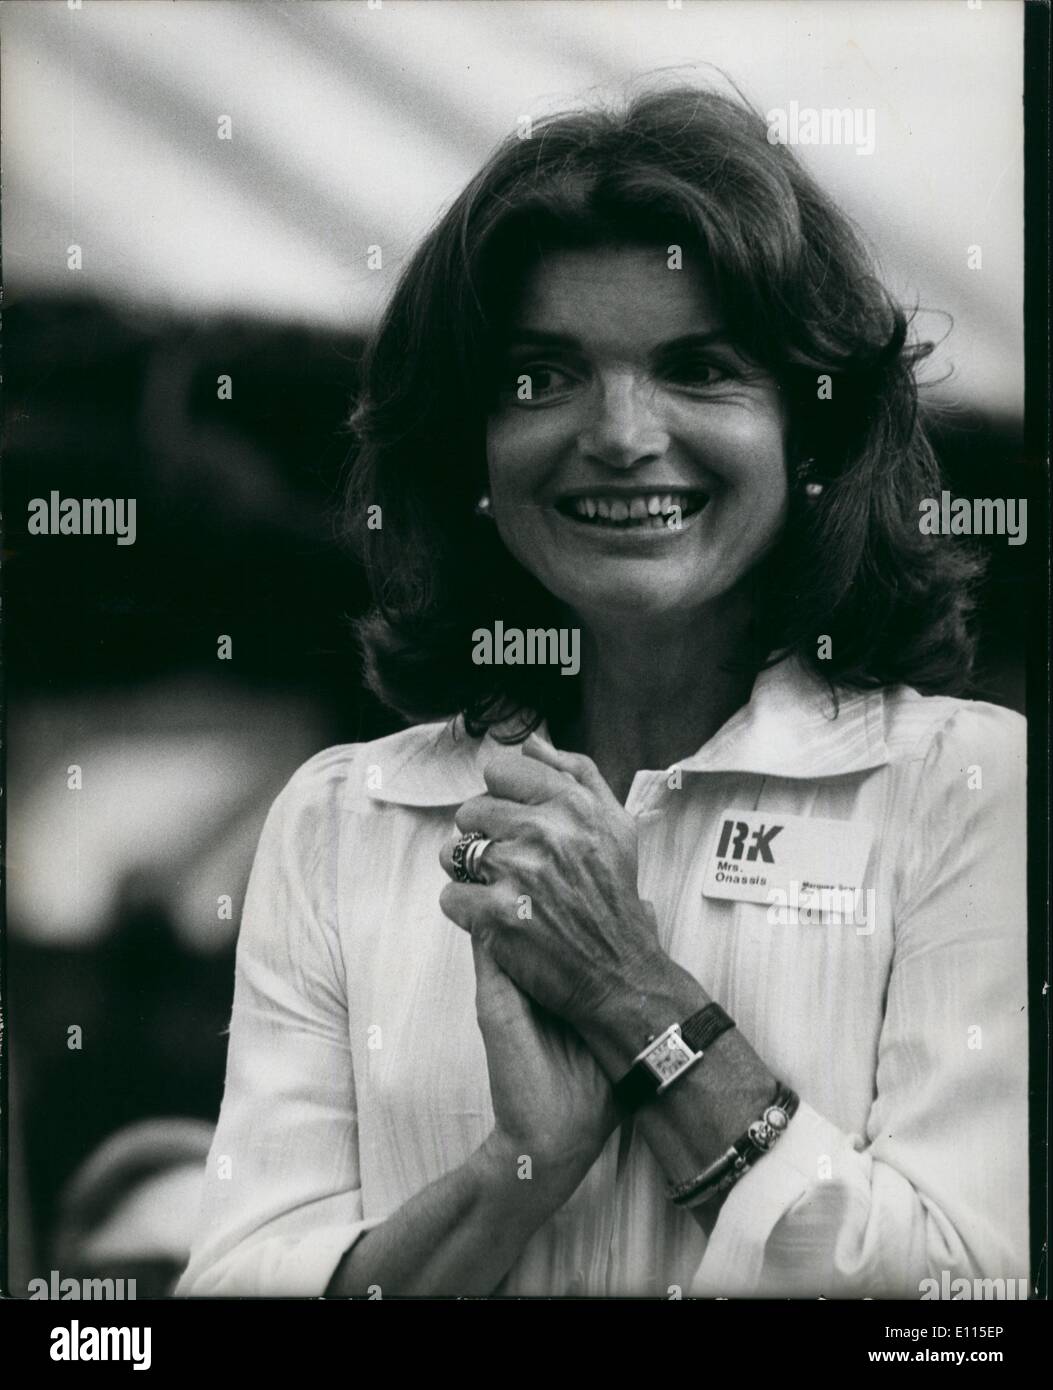 Jackie O High Resolution Stock Photography and Images - Alamy